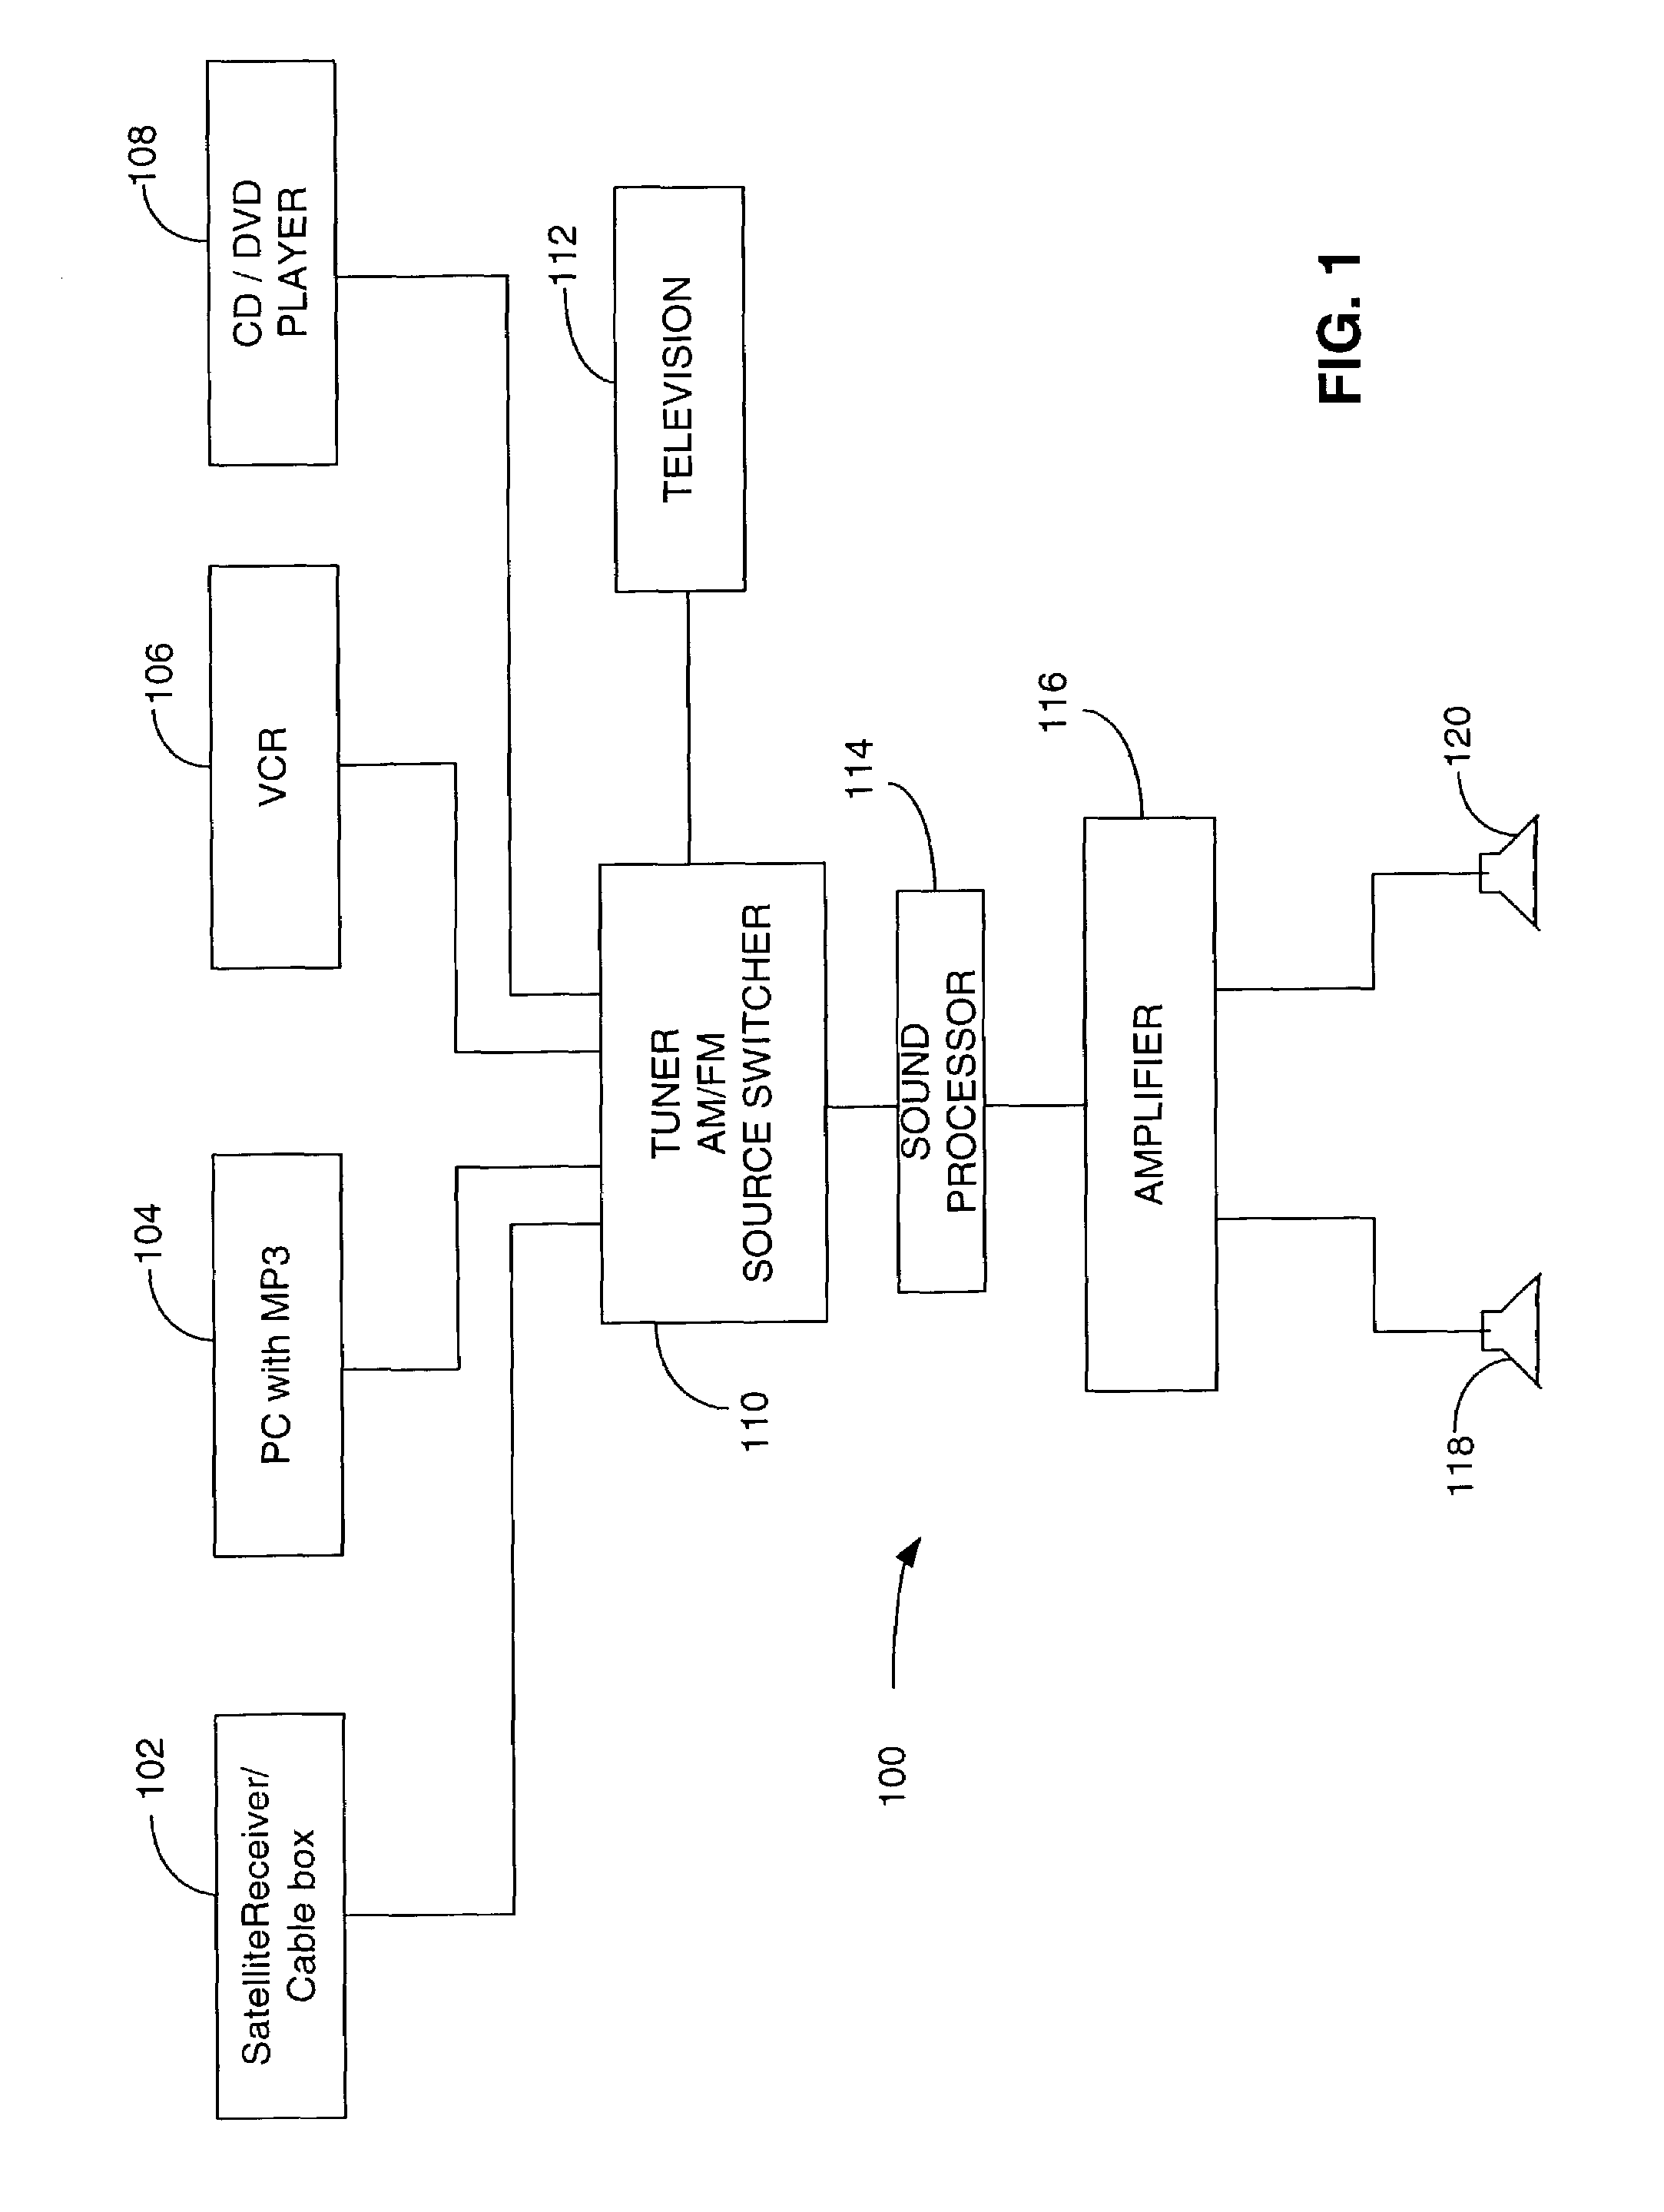 Method and system for disaggregating audio/visual components